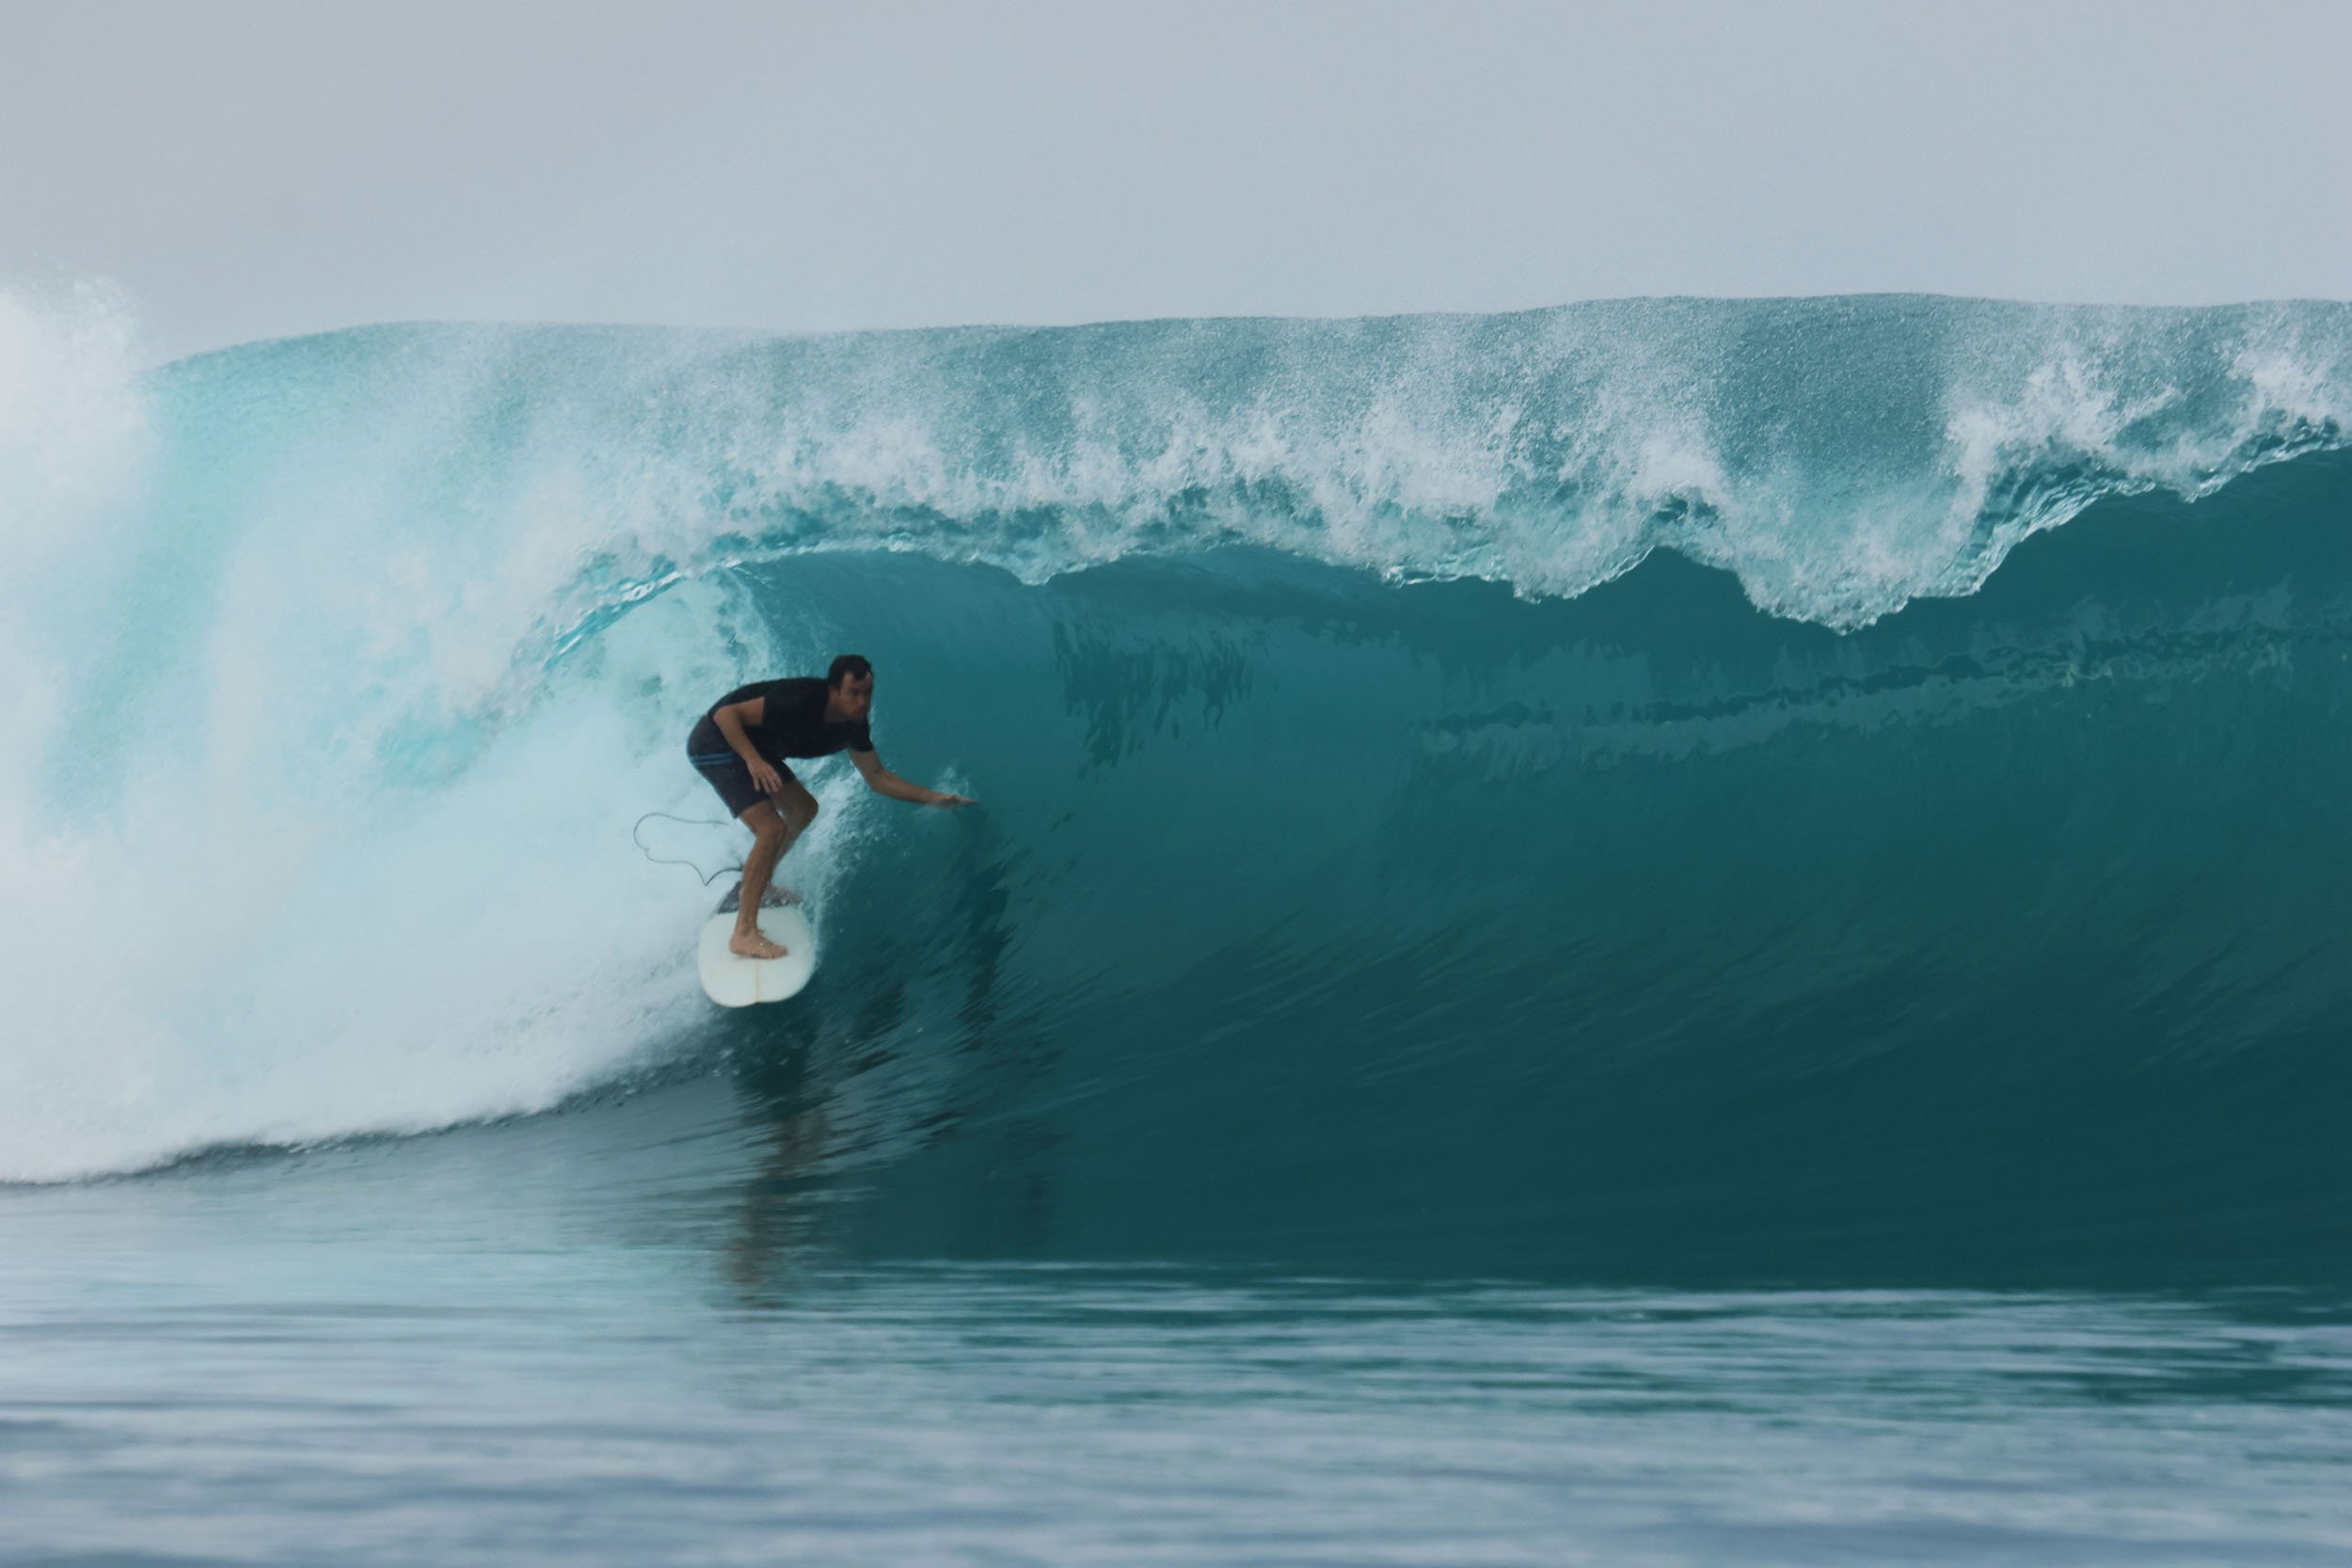 Brad on his second best wave of the morning.